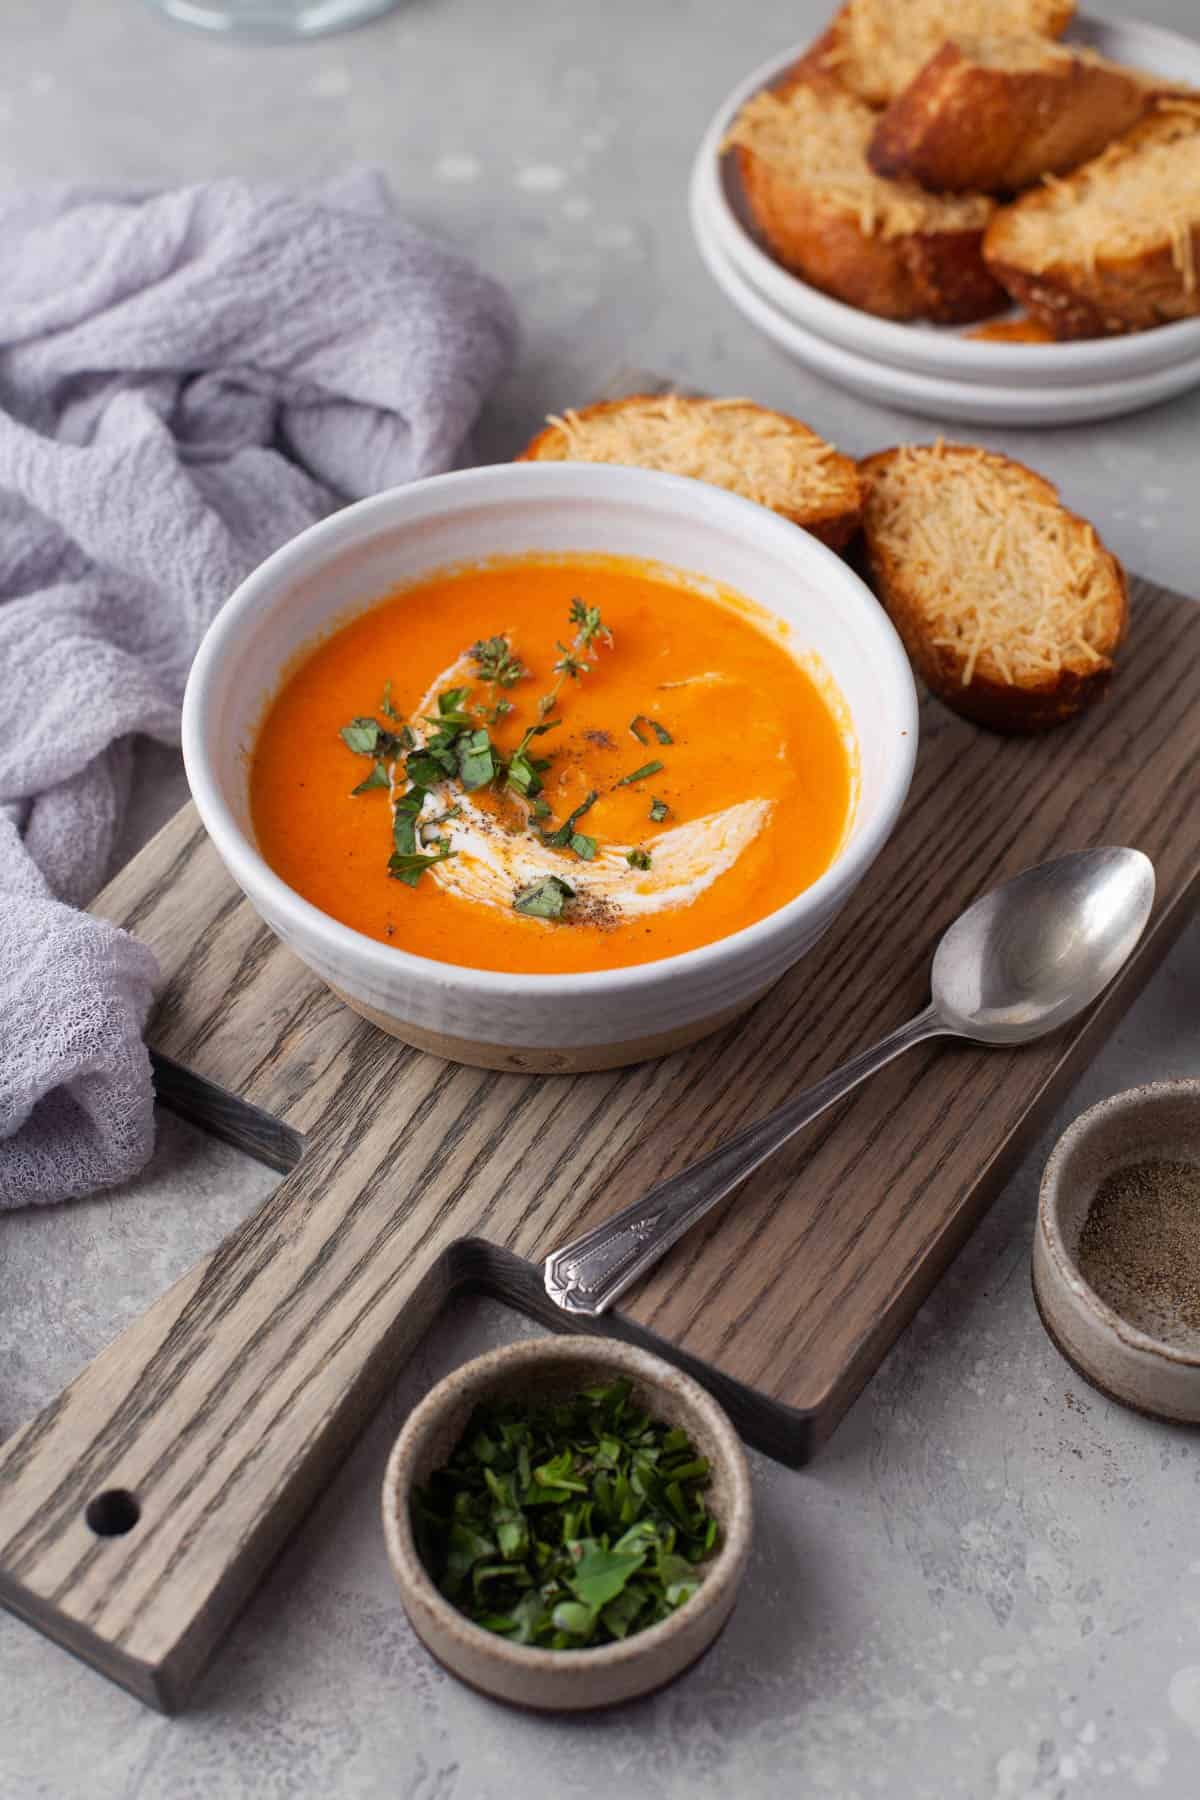 A bowl of creamy tomato soup on a wooden cutting board next to a bowl of fresh herbs, a linen napkin, and toasted bread.